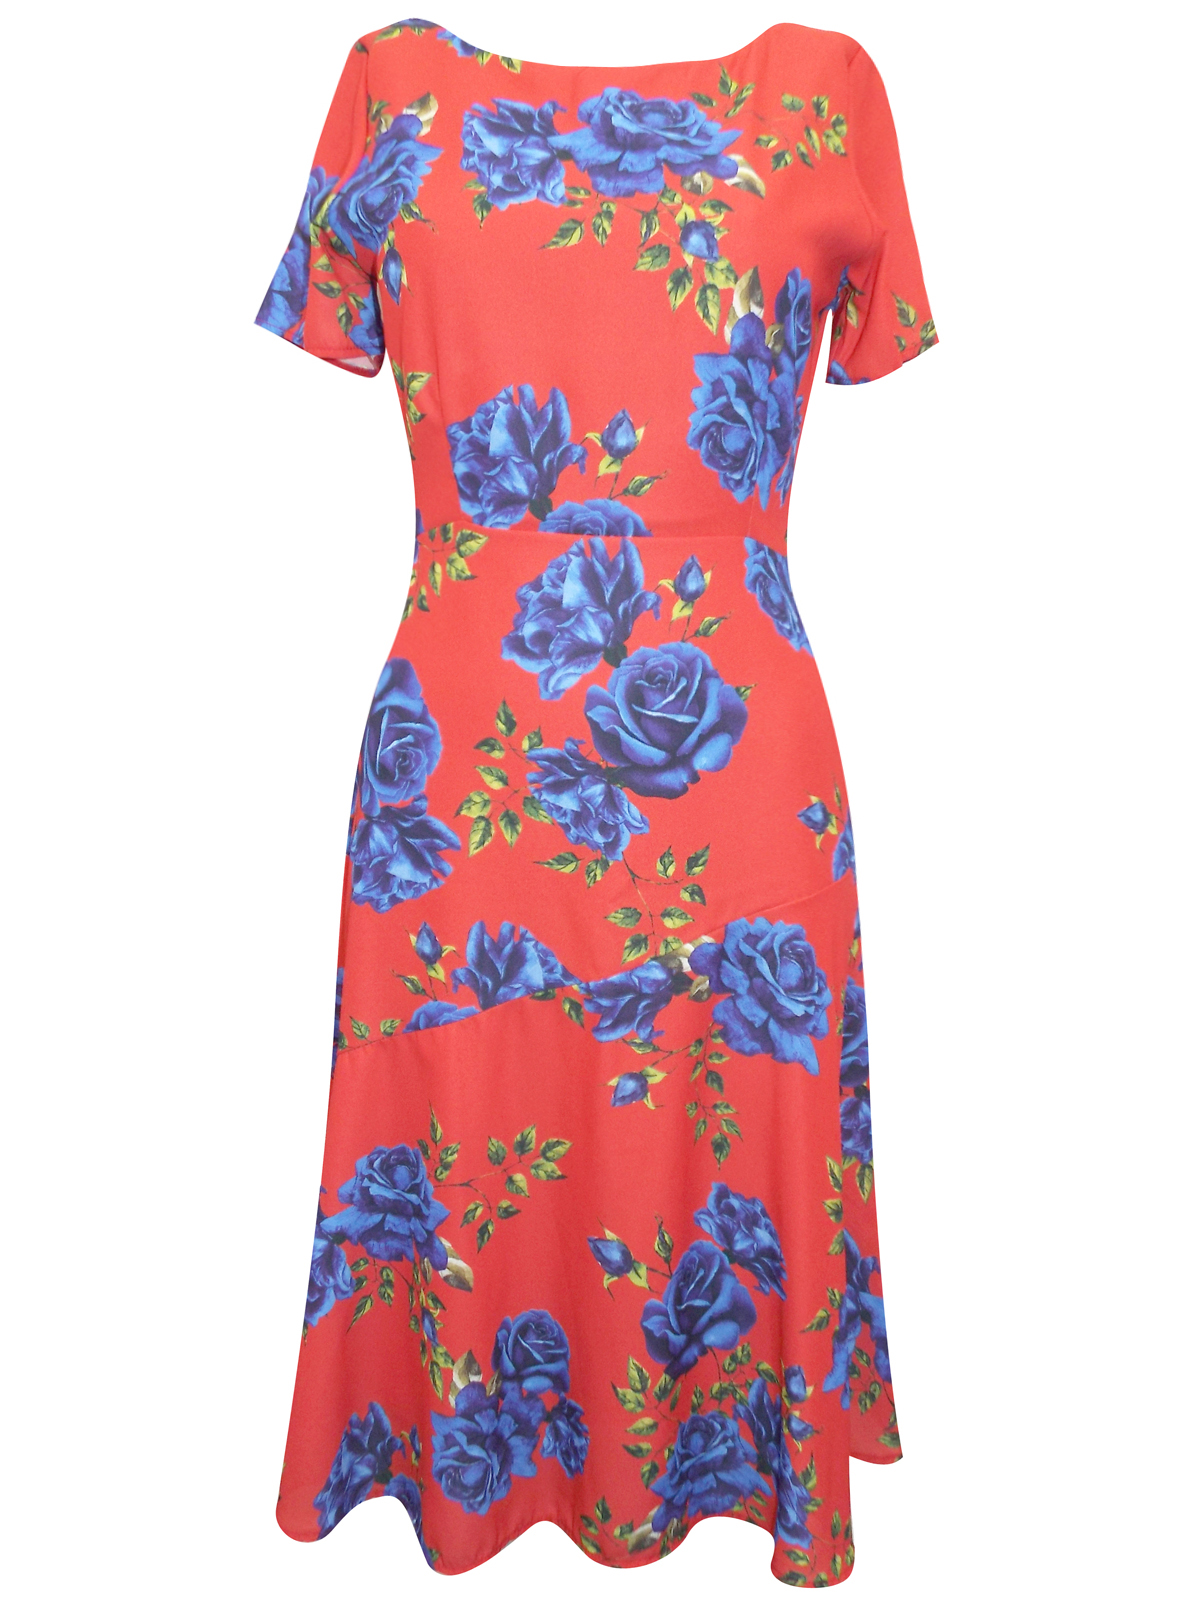 ASSORTED Plain & Printed Dresses - Size 6 to 14